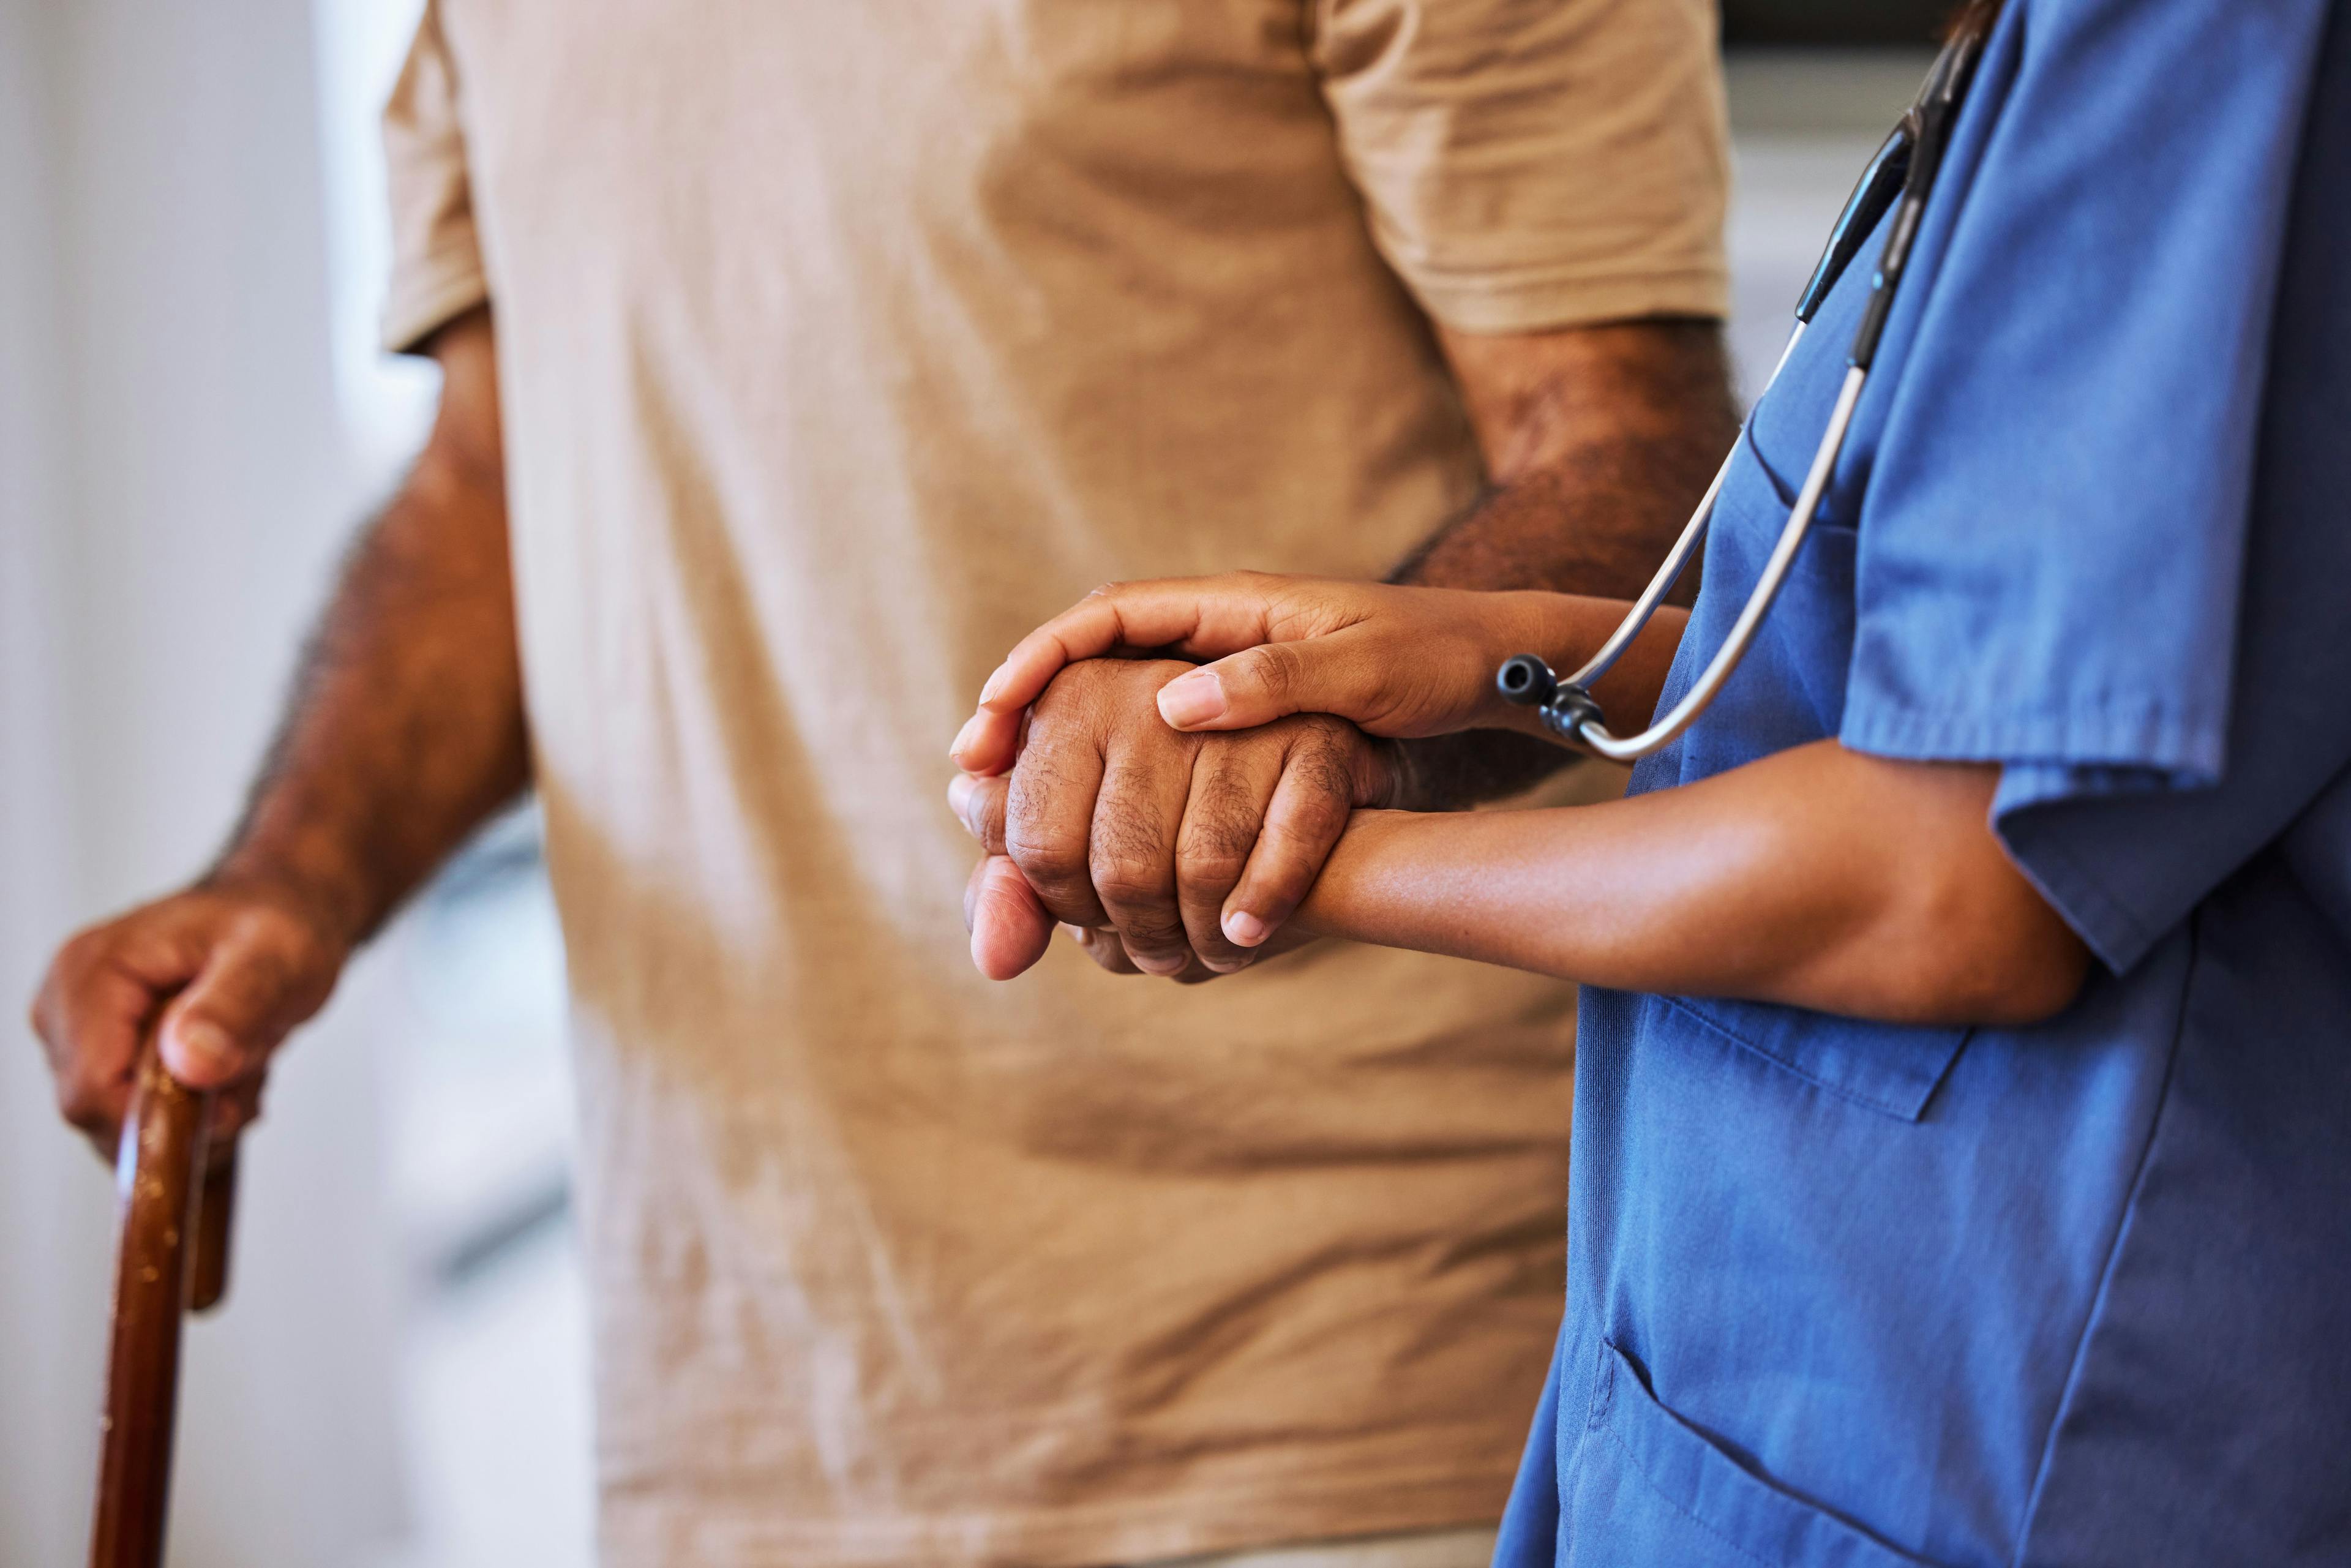 Support, trust and help from caregiver or nurse walking with senior man or patient in retirement home with healthcare insurance. Hands of female medical worker and alzheimers male with hospice care | Image Credit: © Beaunitta Van Wyk/peopleimages.com - stock.adobe.com